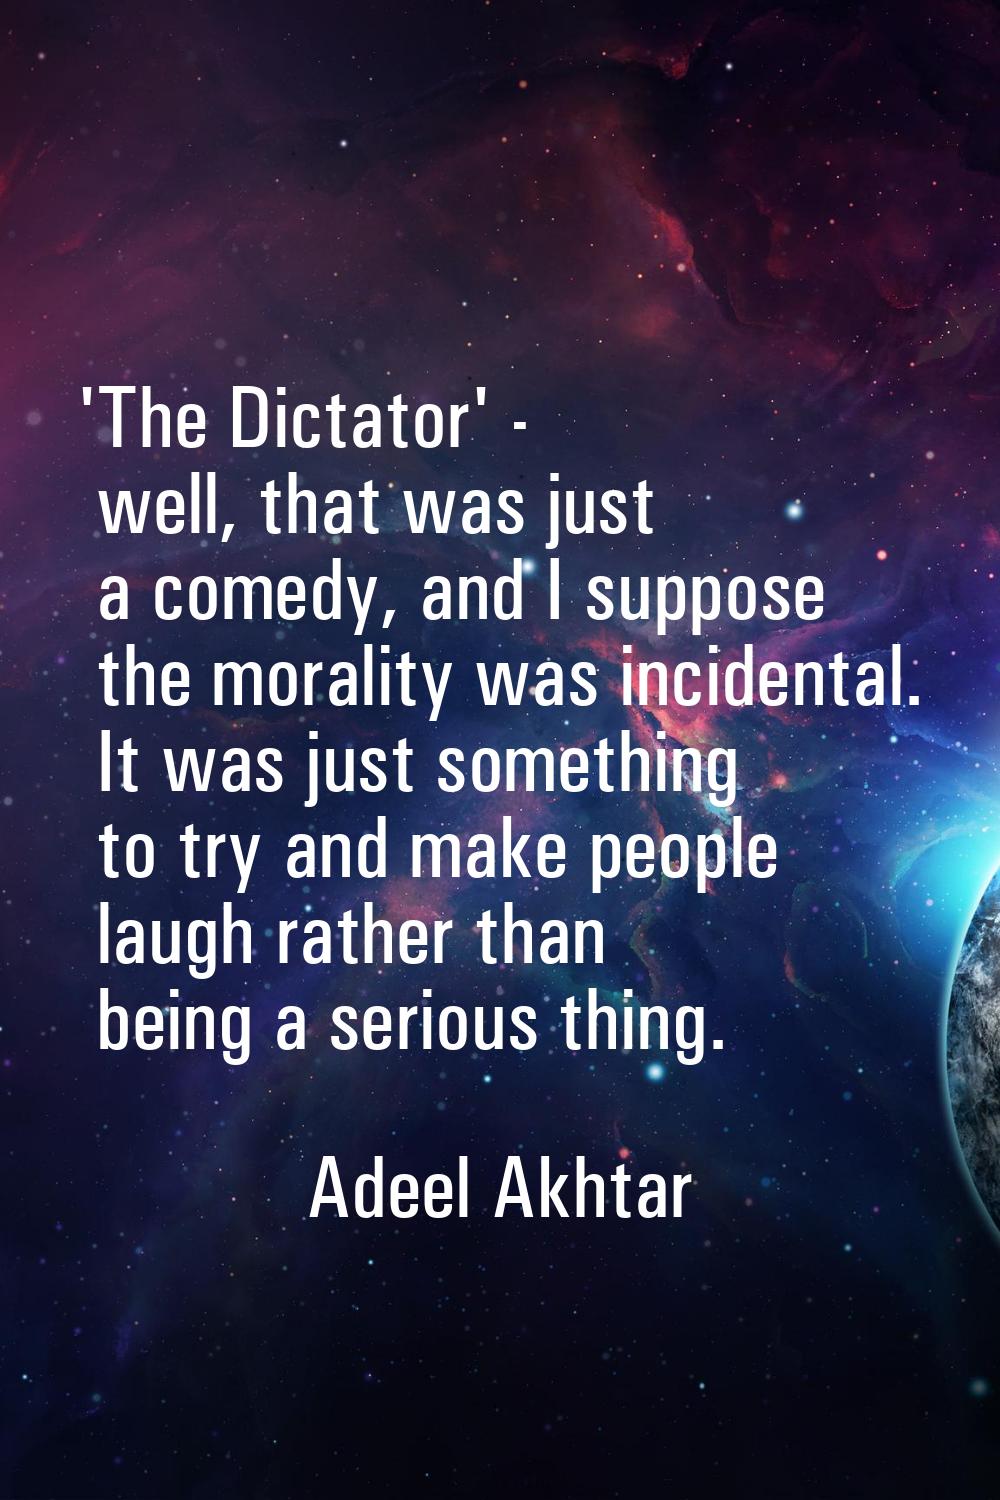 'The Dictator' - well, that was just a comedy, and I suppose the morality was incidental. It was ju